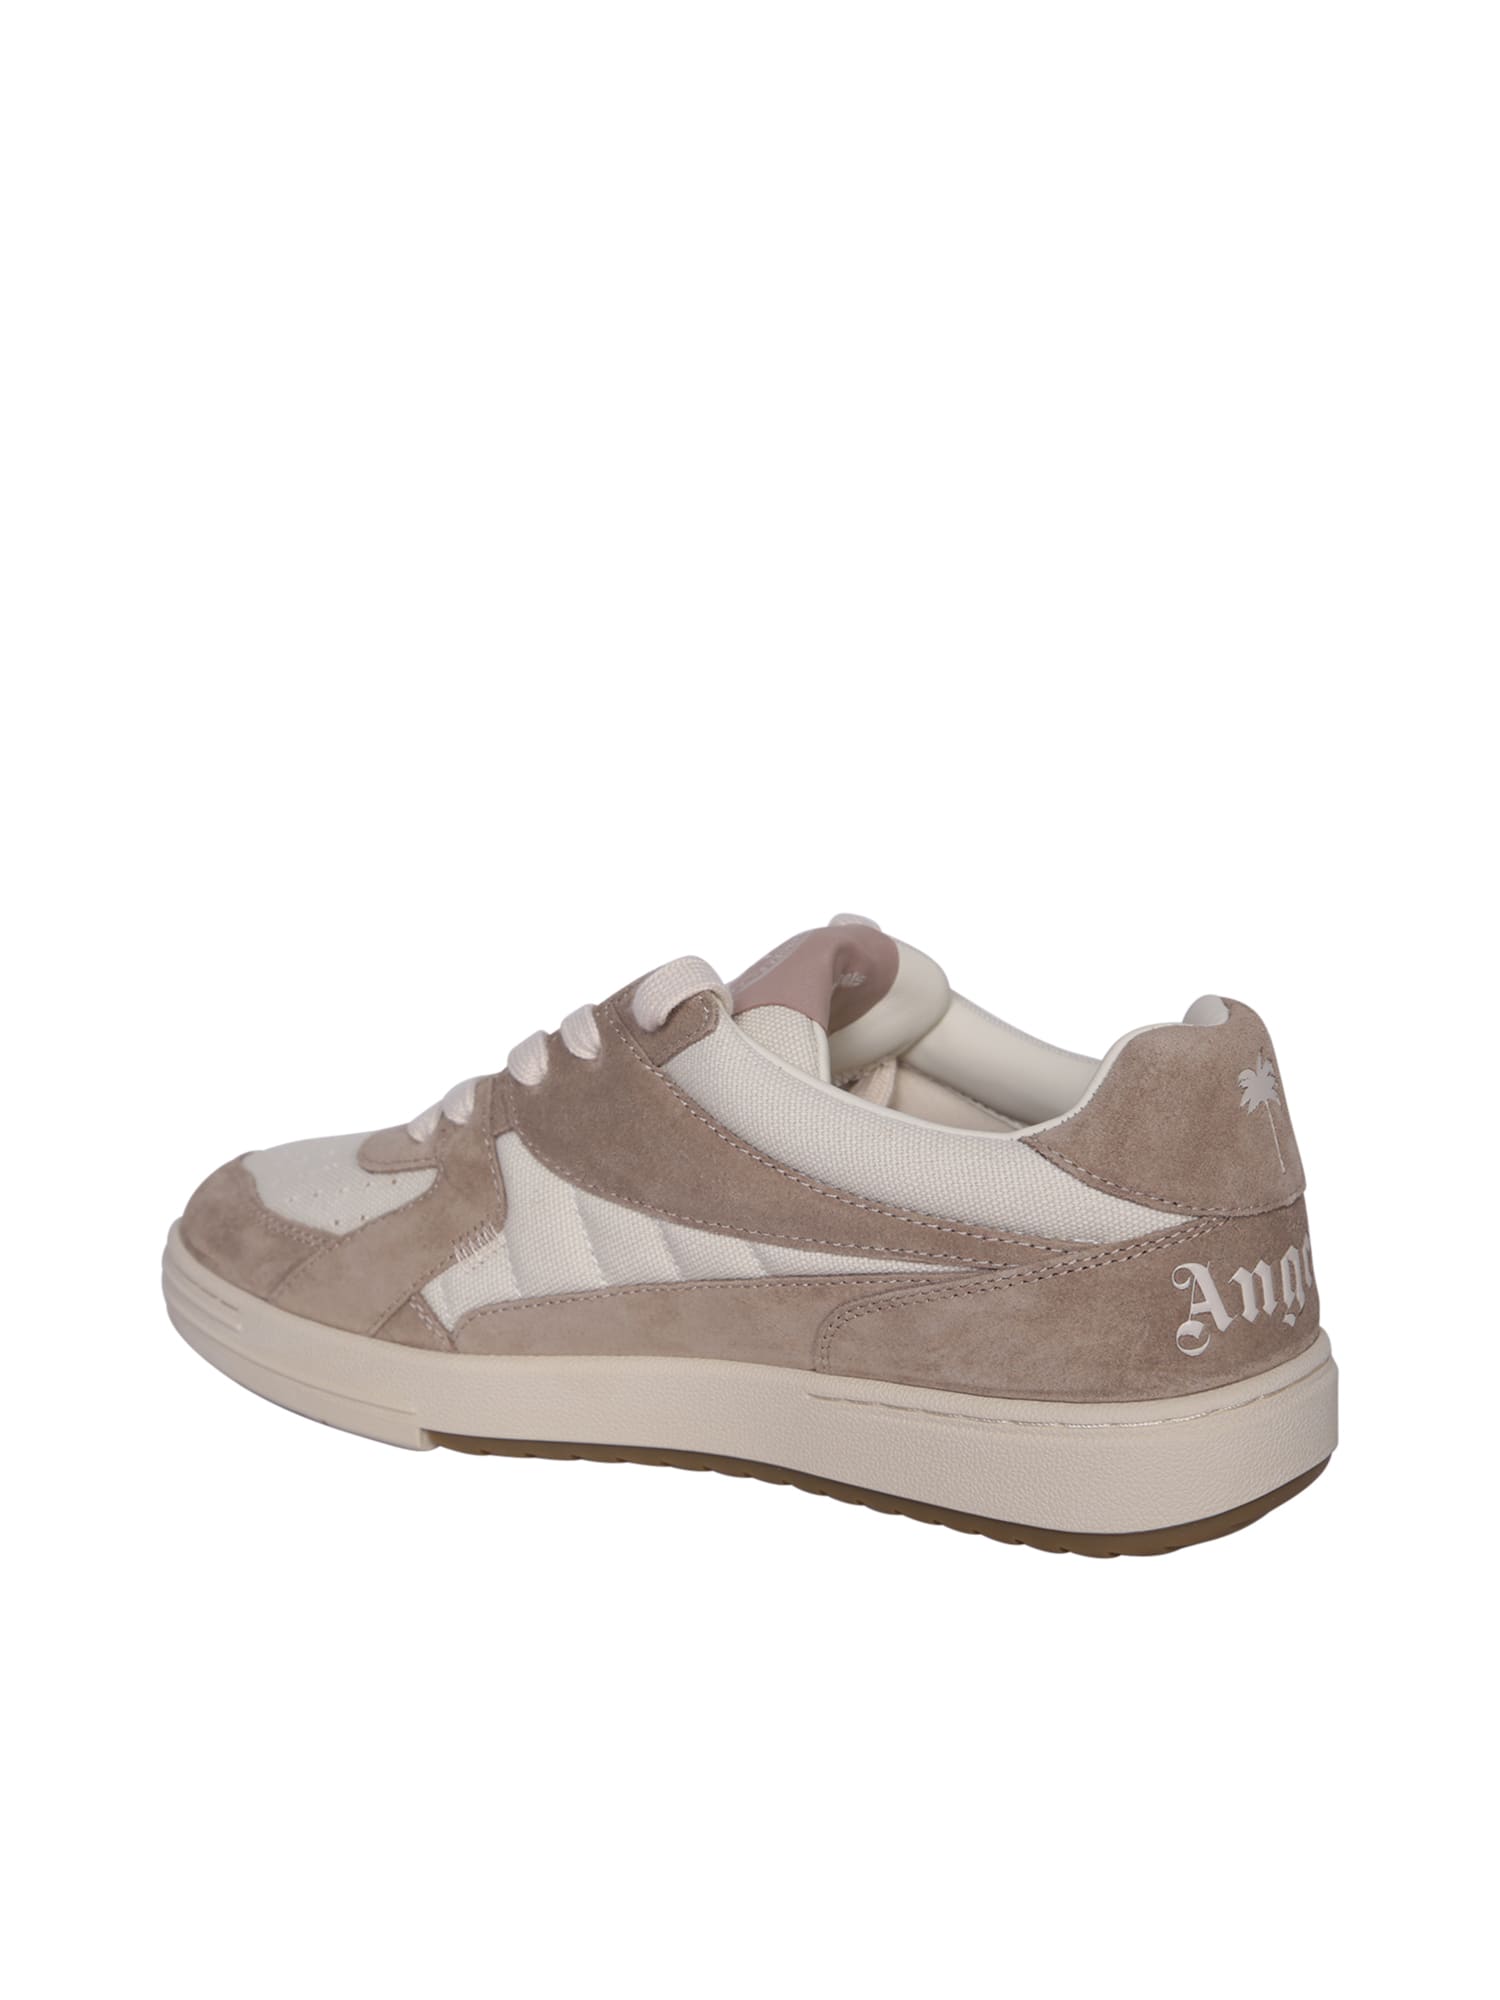 Shop Palm Angels University Suede White/ Camel Sneakers